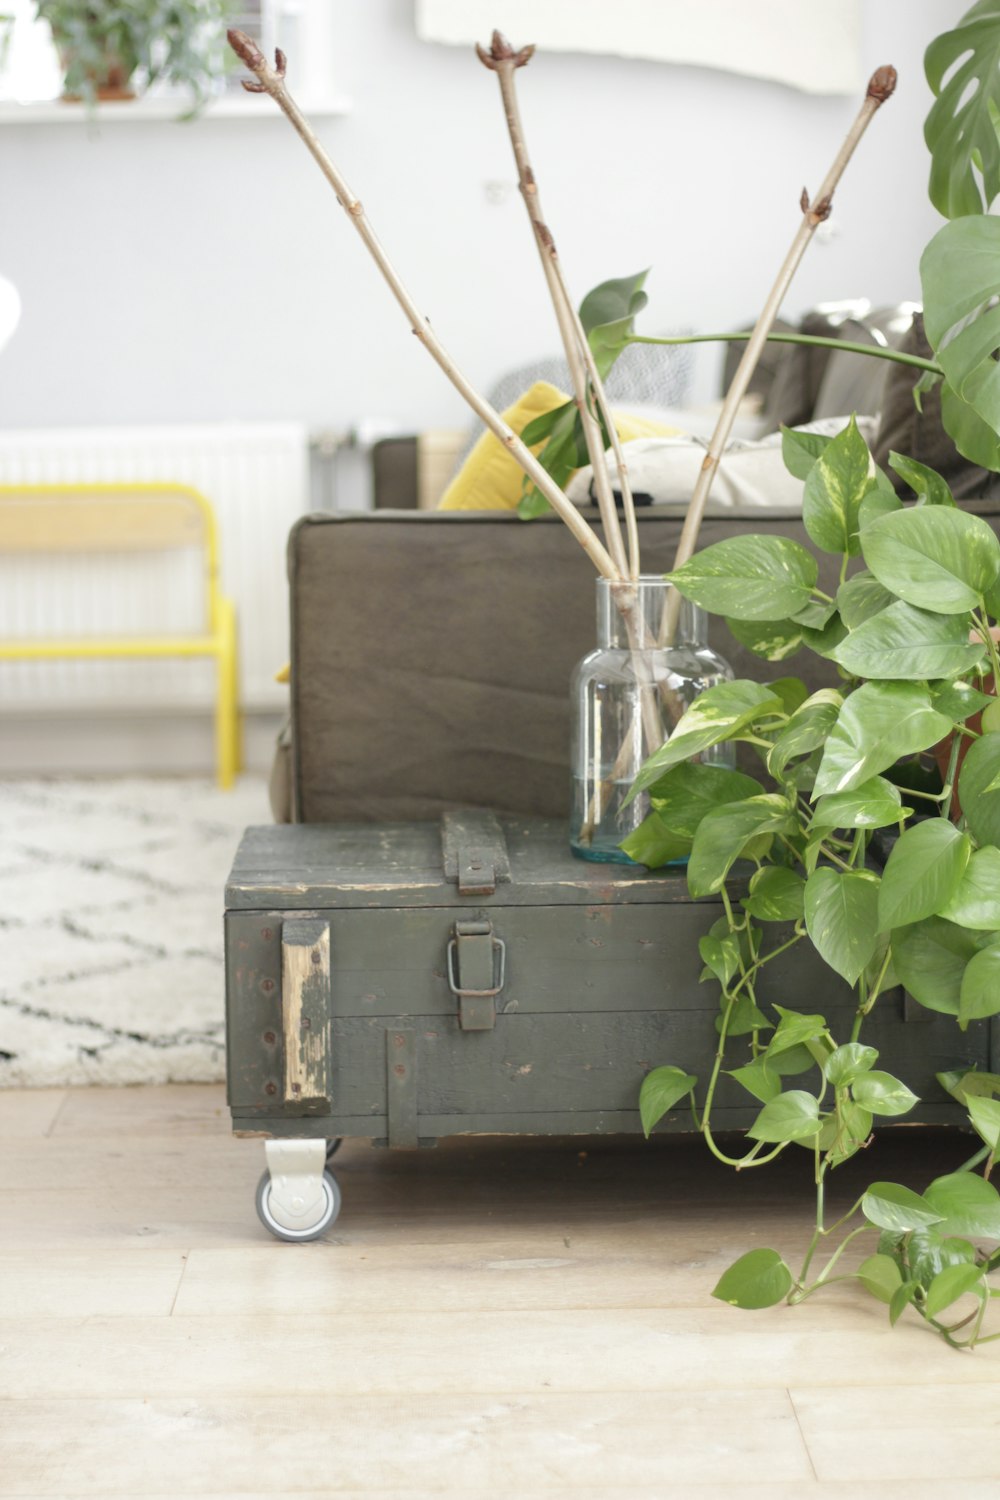 a suitcase sitting on the floor next to a plant